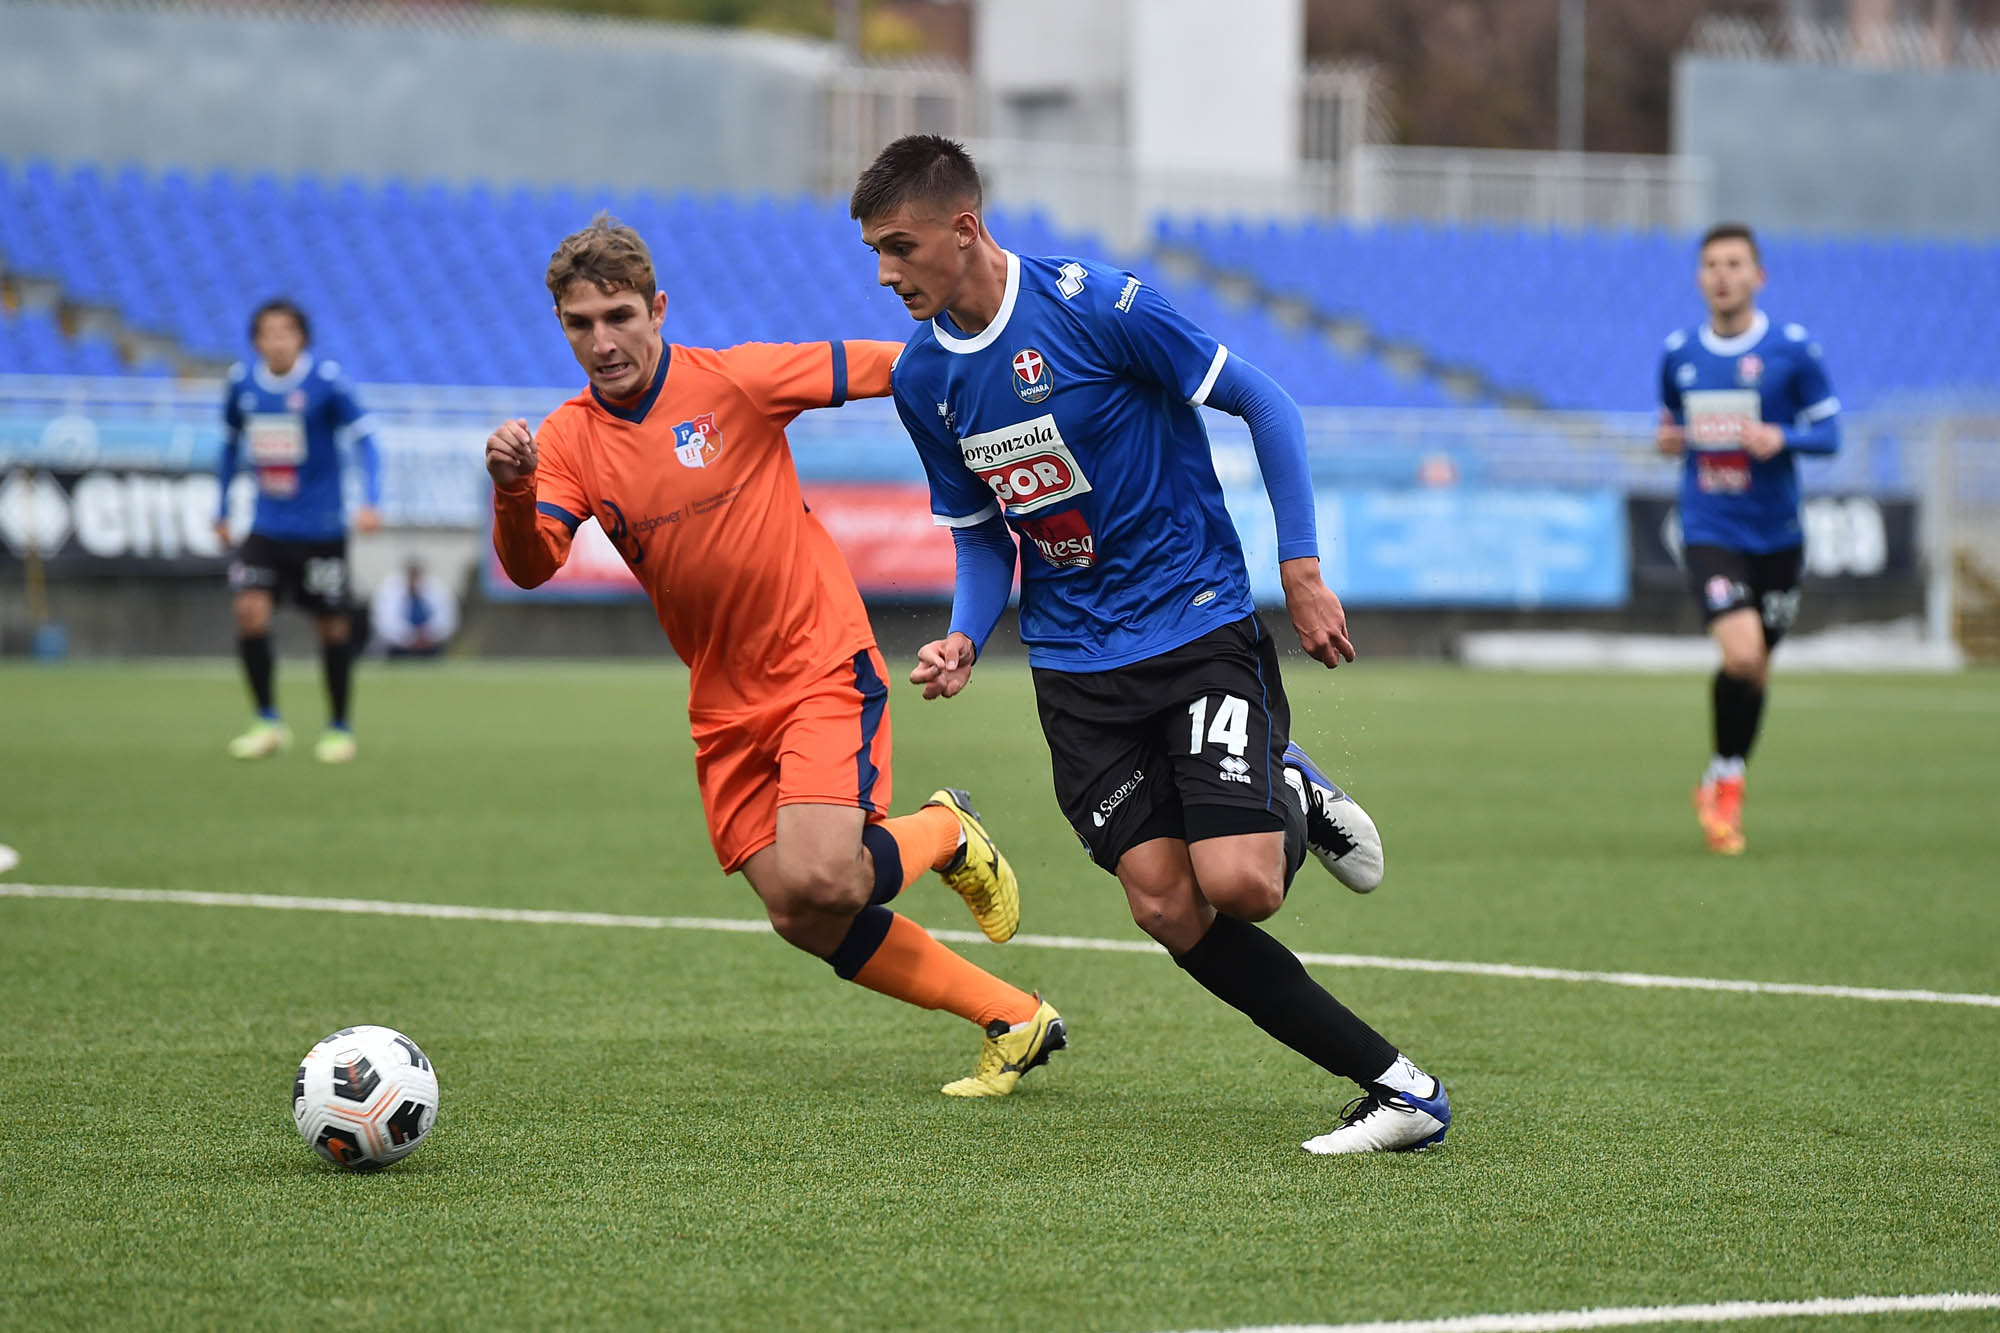 Read more about the article Novara-PDHAE 1-2 | Tabellino del match